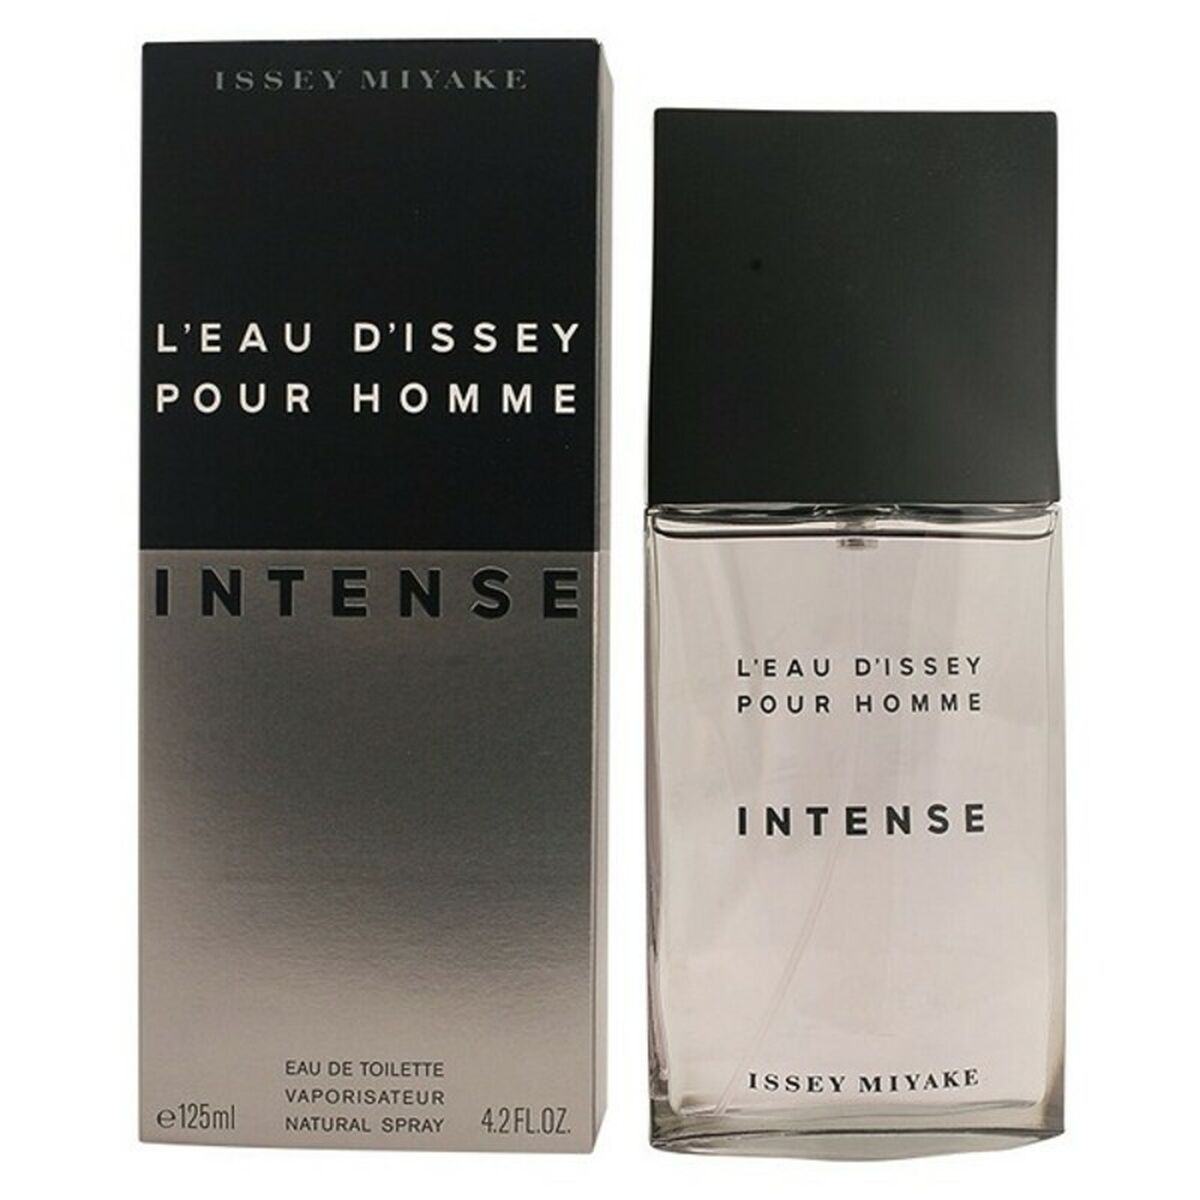 Herenparfum Issey Miyake EDT L'eau D'issey Pour Homme Intense (125 ml)